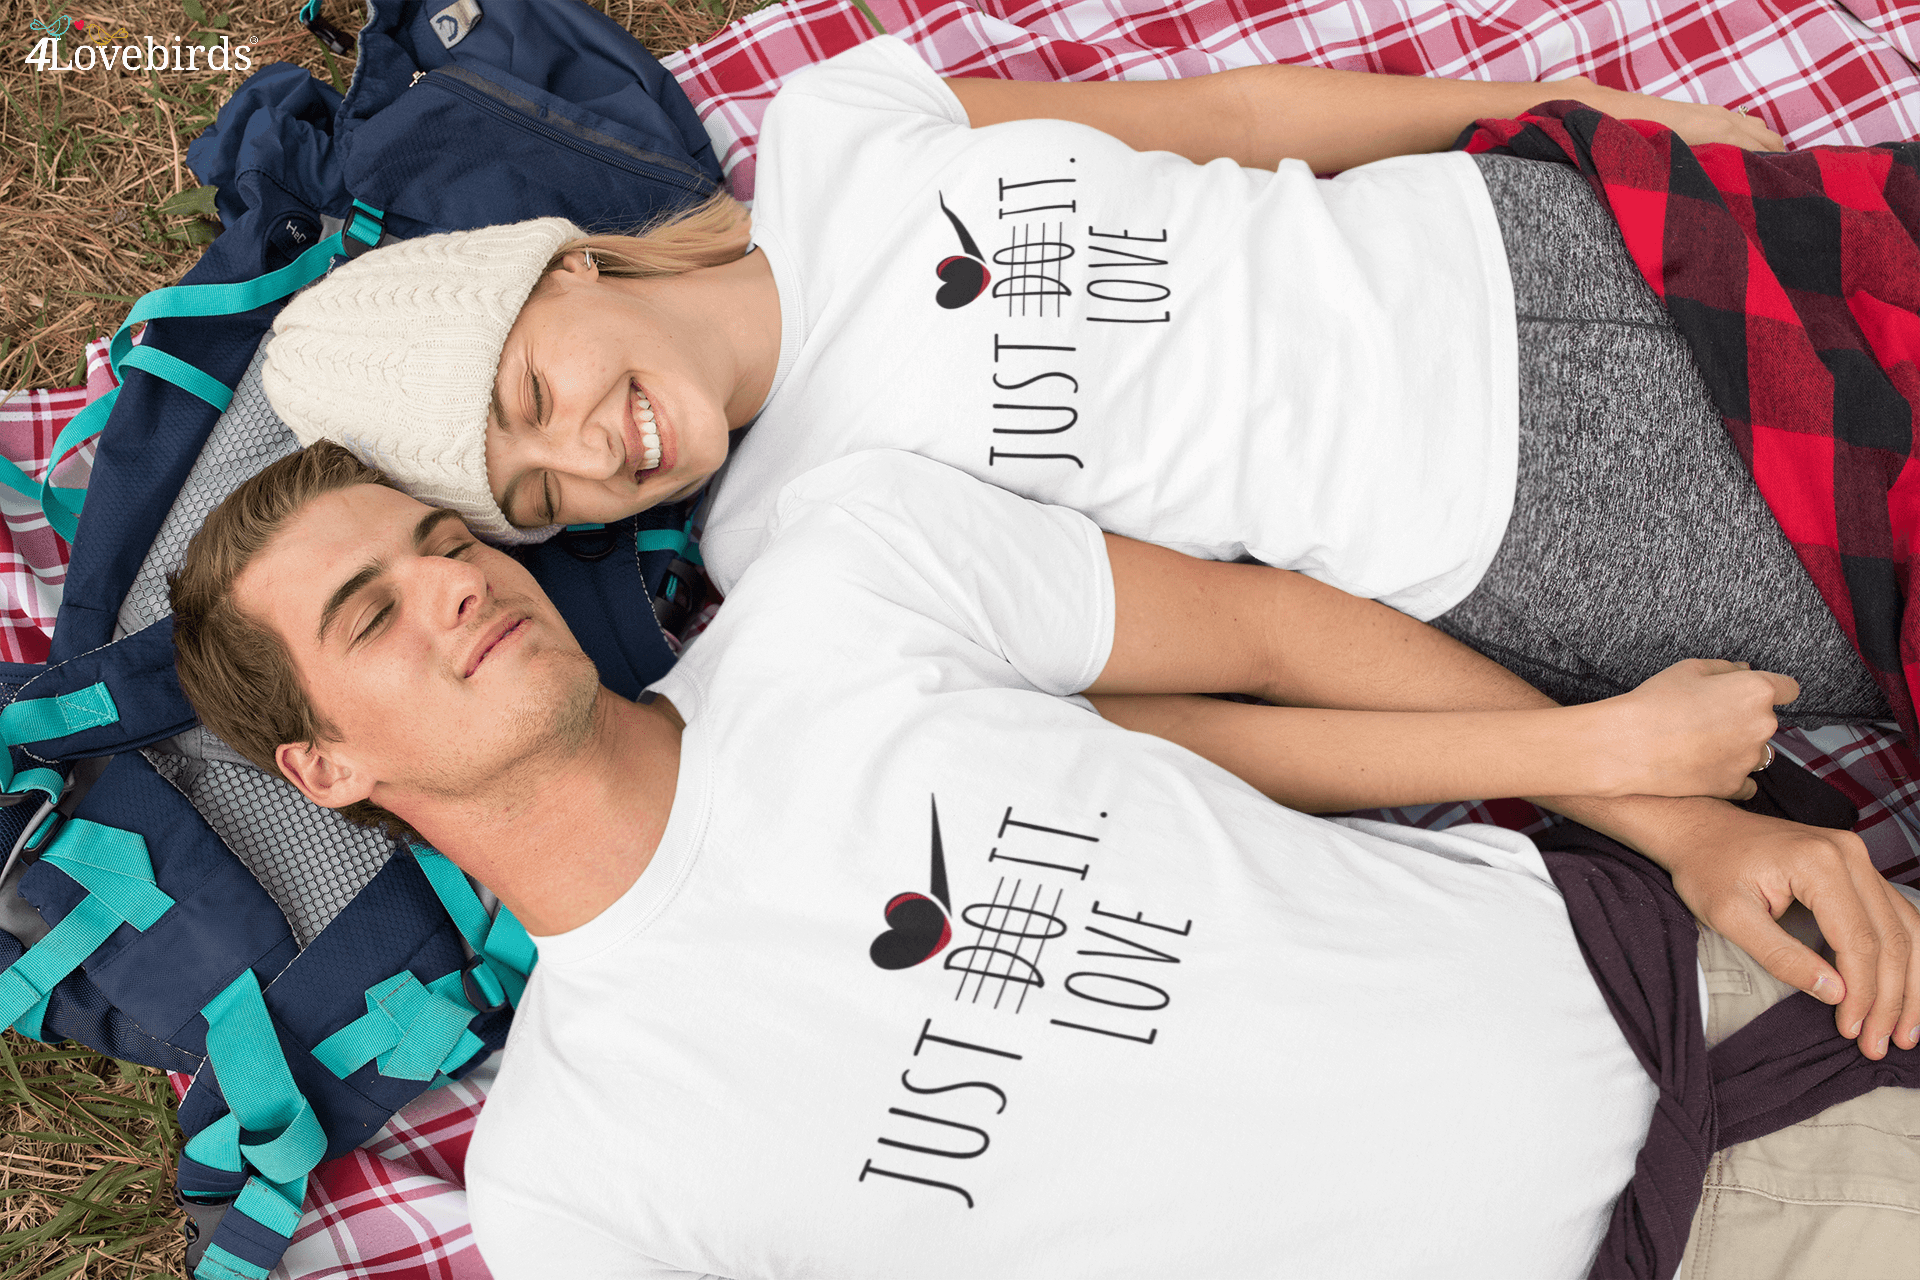 Just Love It Hoodie, Matching Couple Sweatshirts, Longsleeve shirt for Couples, Matching Couple, Valentine's Day Gifts, Wedding Gifts, Gift - 4Lovebirds